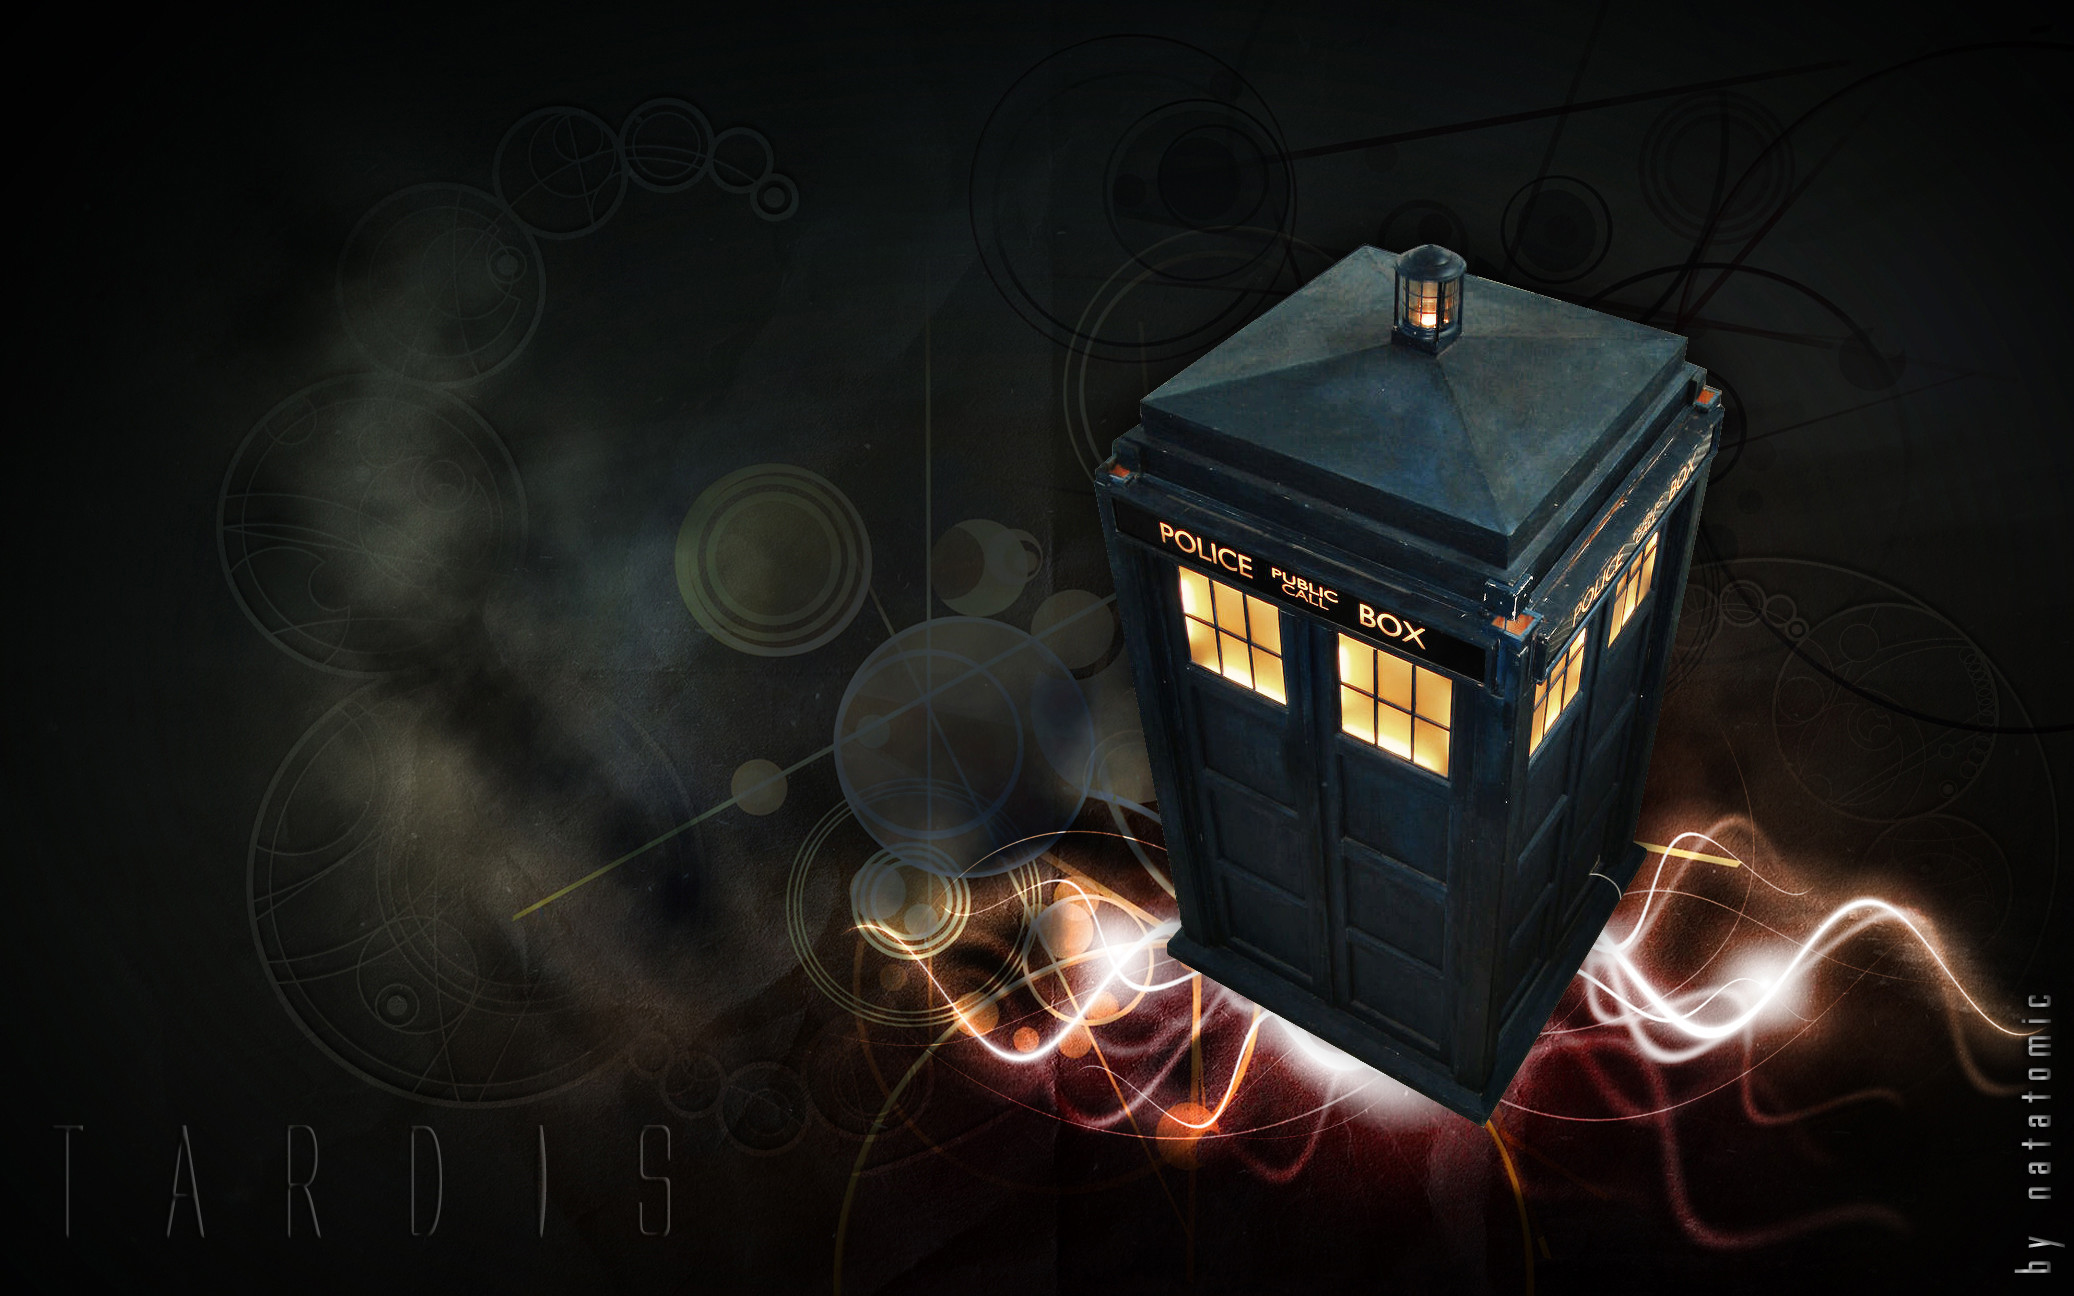 Best ideas about Doctor who wallpaper on Pinterest Tardis HD Wallpapers Pinterest 3d wallpaper, Wallpaper and Hd wallpaper